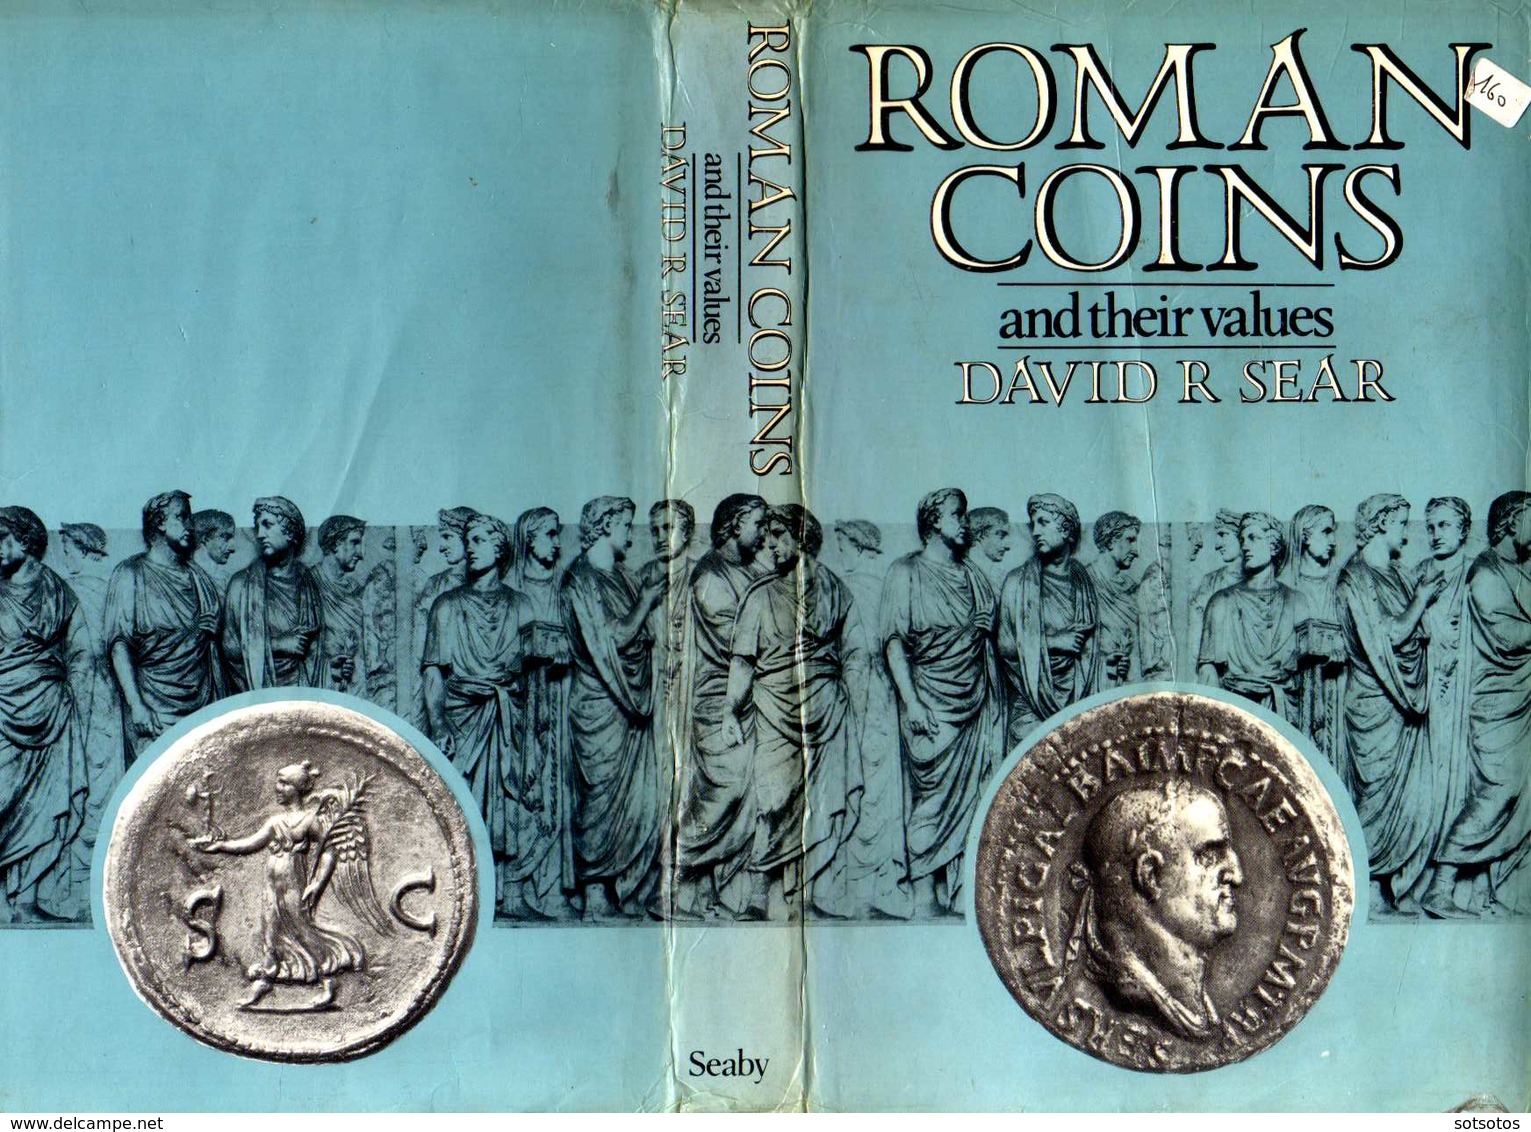 Roman Coins And Their Values: David R. Sear - Third Revised Edition 1981, Seaby - 376 Pages + 12 Pages Of Photos, In Ver - Antike